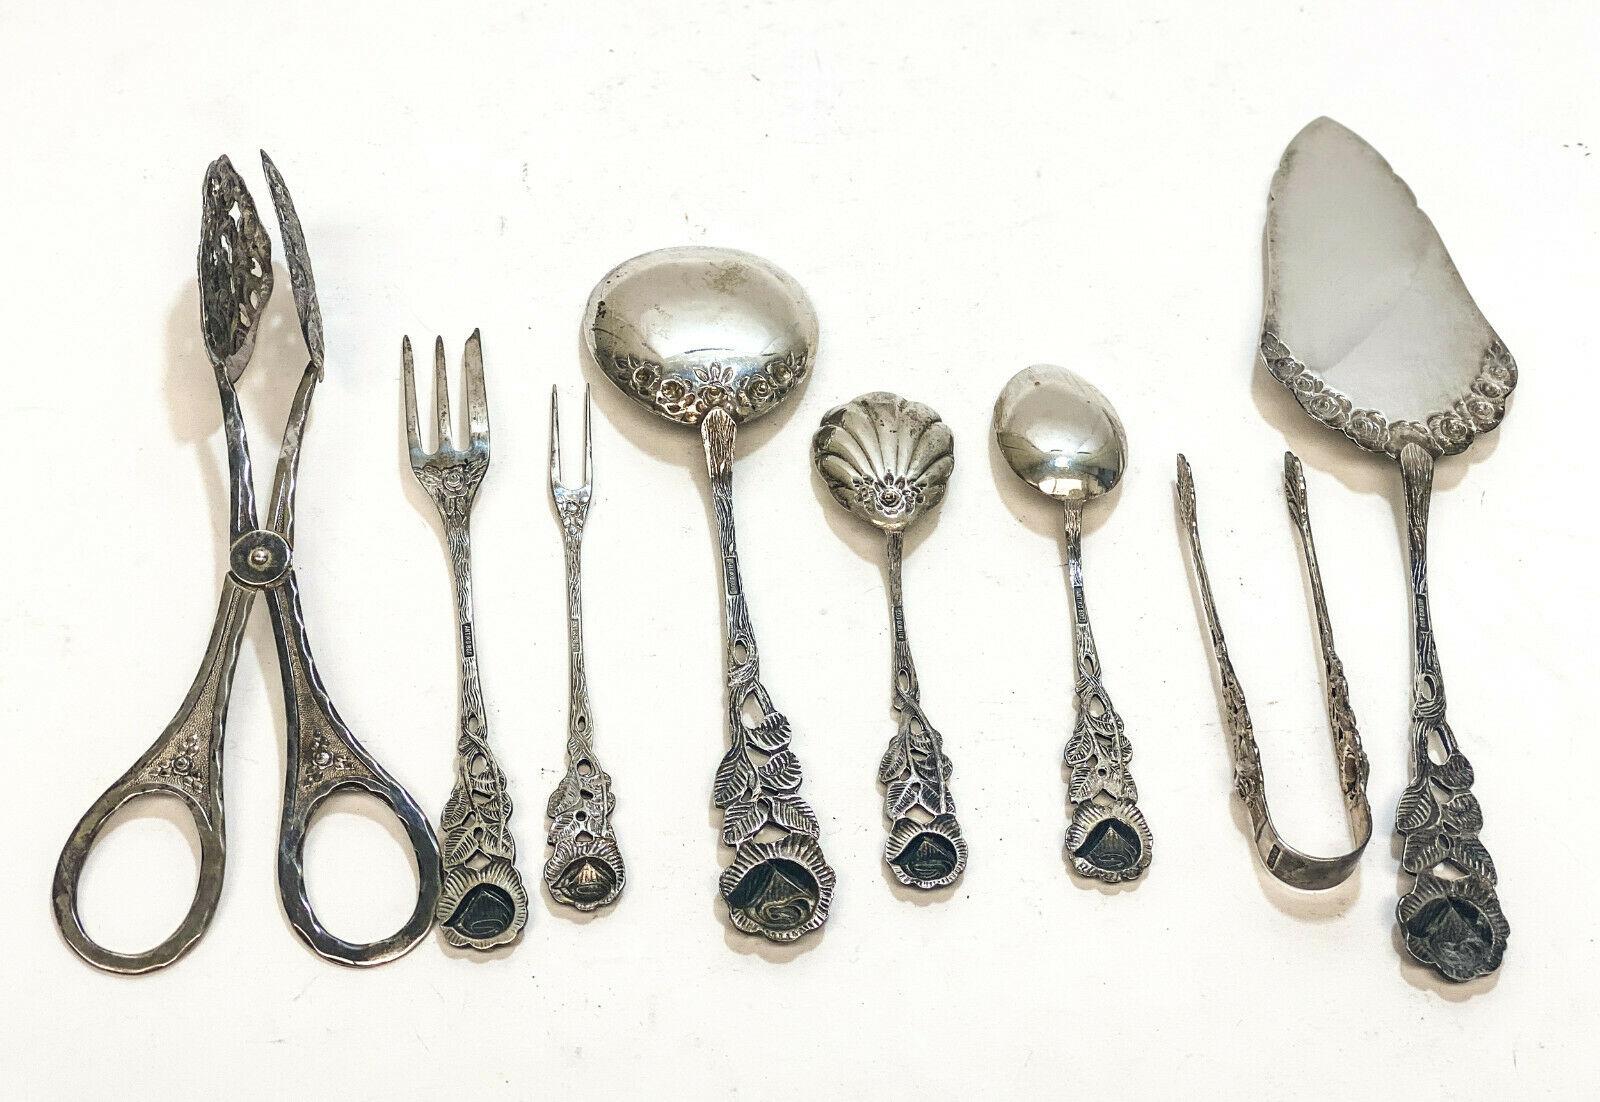 Antiko German 800 Silver 8 Piece Full Dessert flatware service for 12, c. 1960. Beautiful hand chased roses to the handles. Antiko 800 mark to the verso of the handle.

The service includes:
12 Dessert Forks, 12 teaspoons, 2 jam spoons, 2 serving